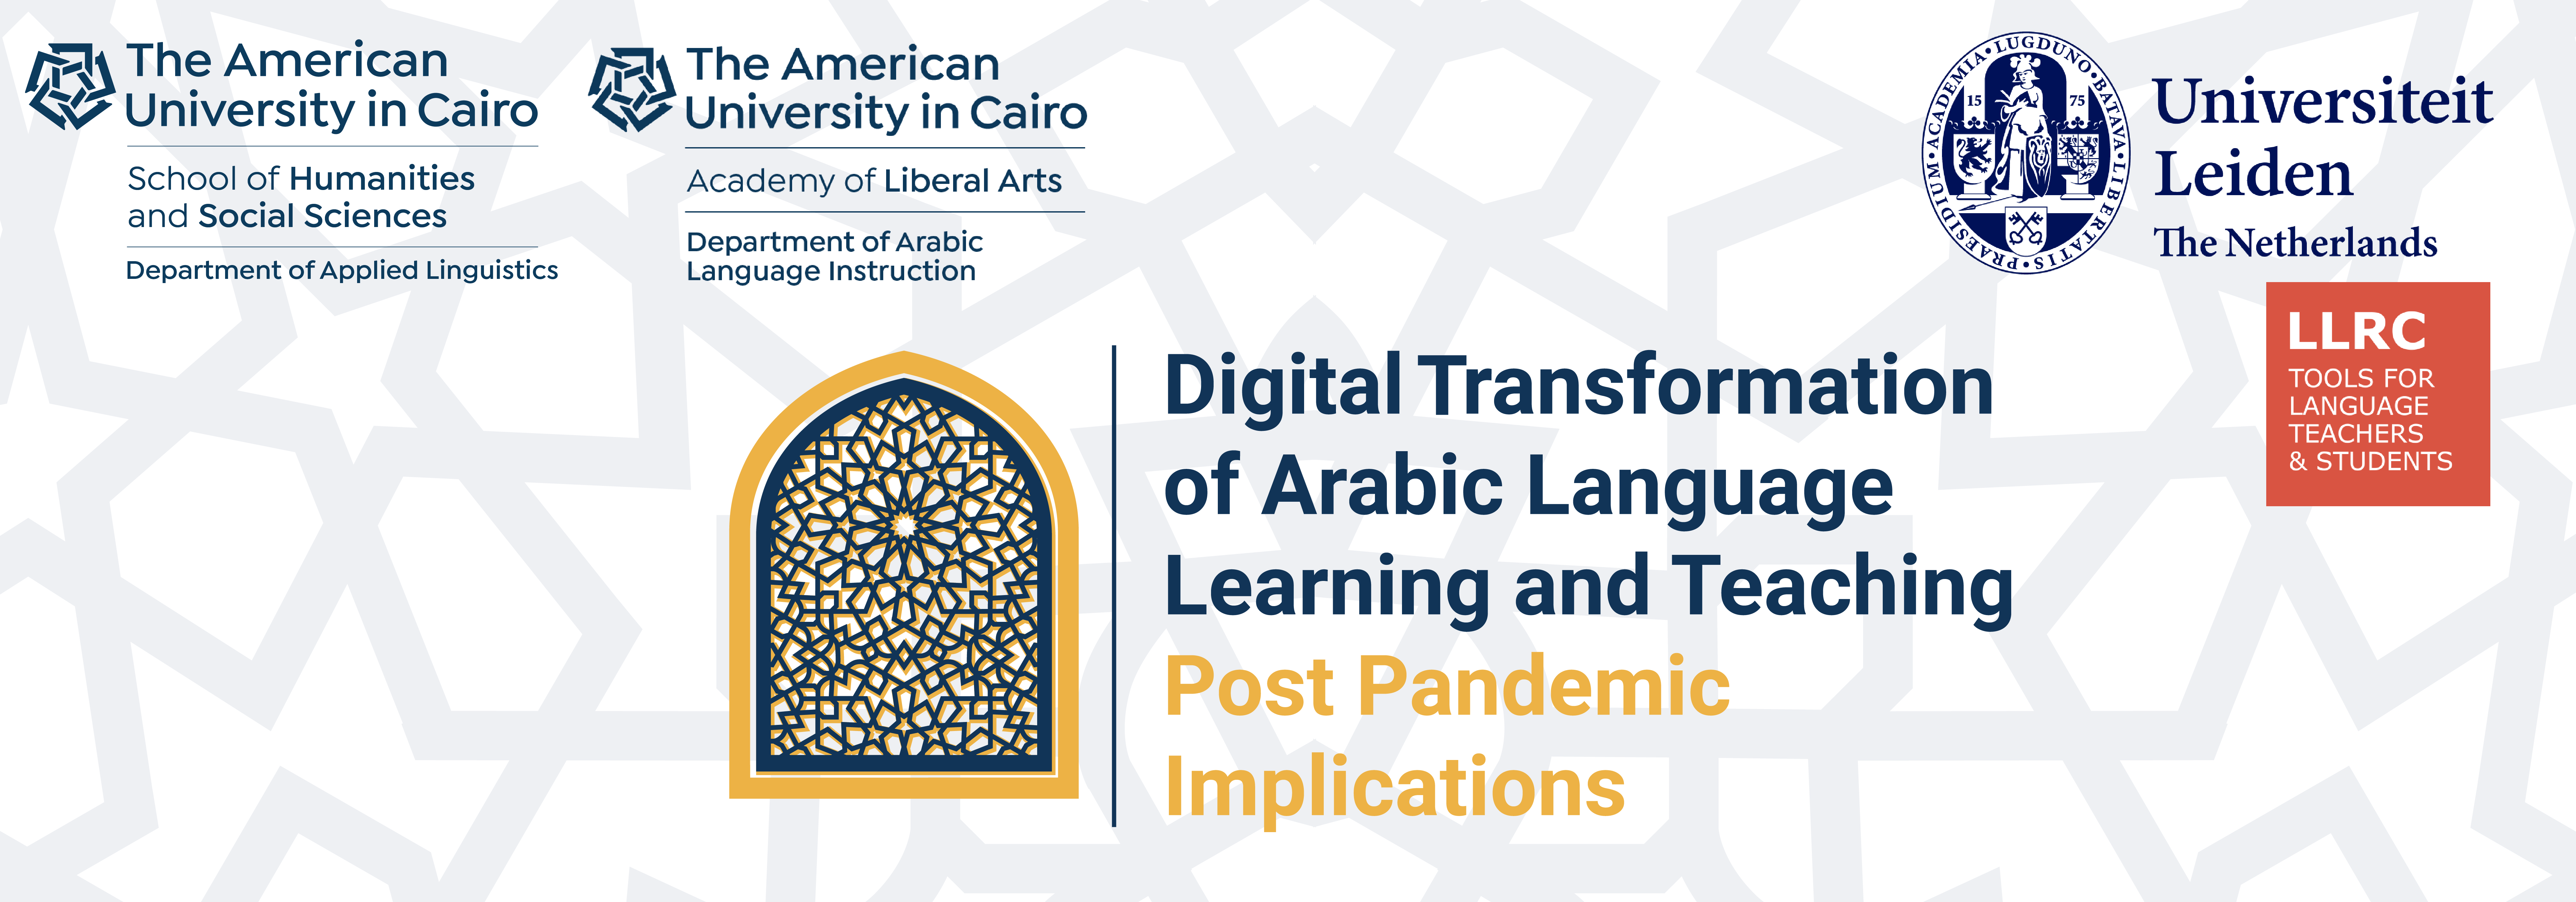 Digital Transformation of Arabic Language Learning and Teaching: Post Pandemic Implications